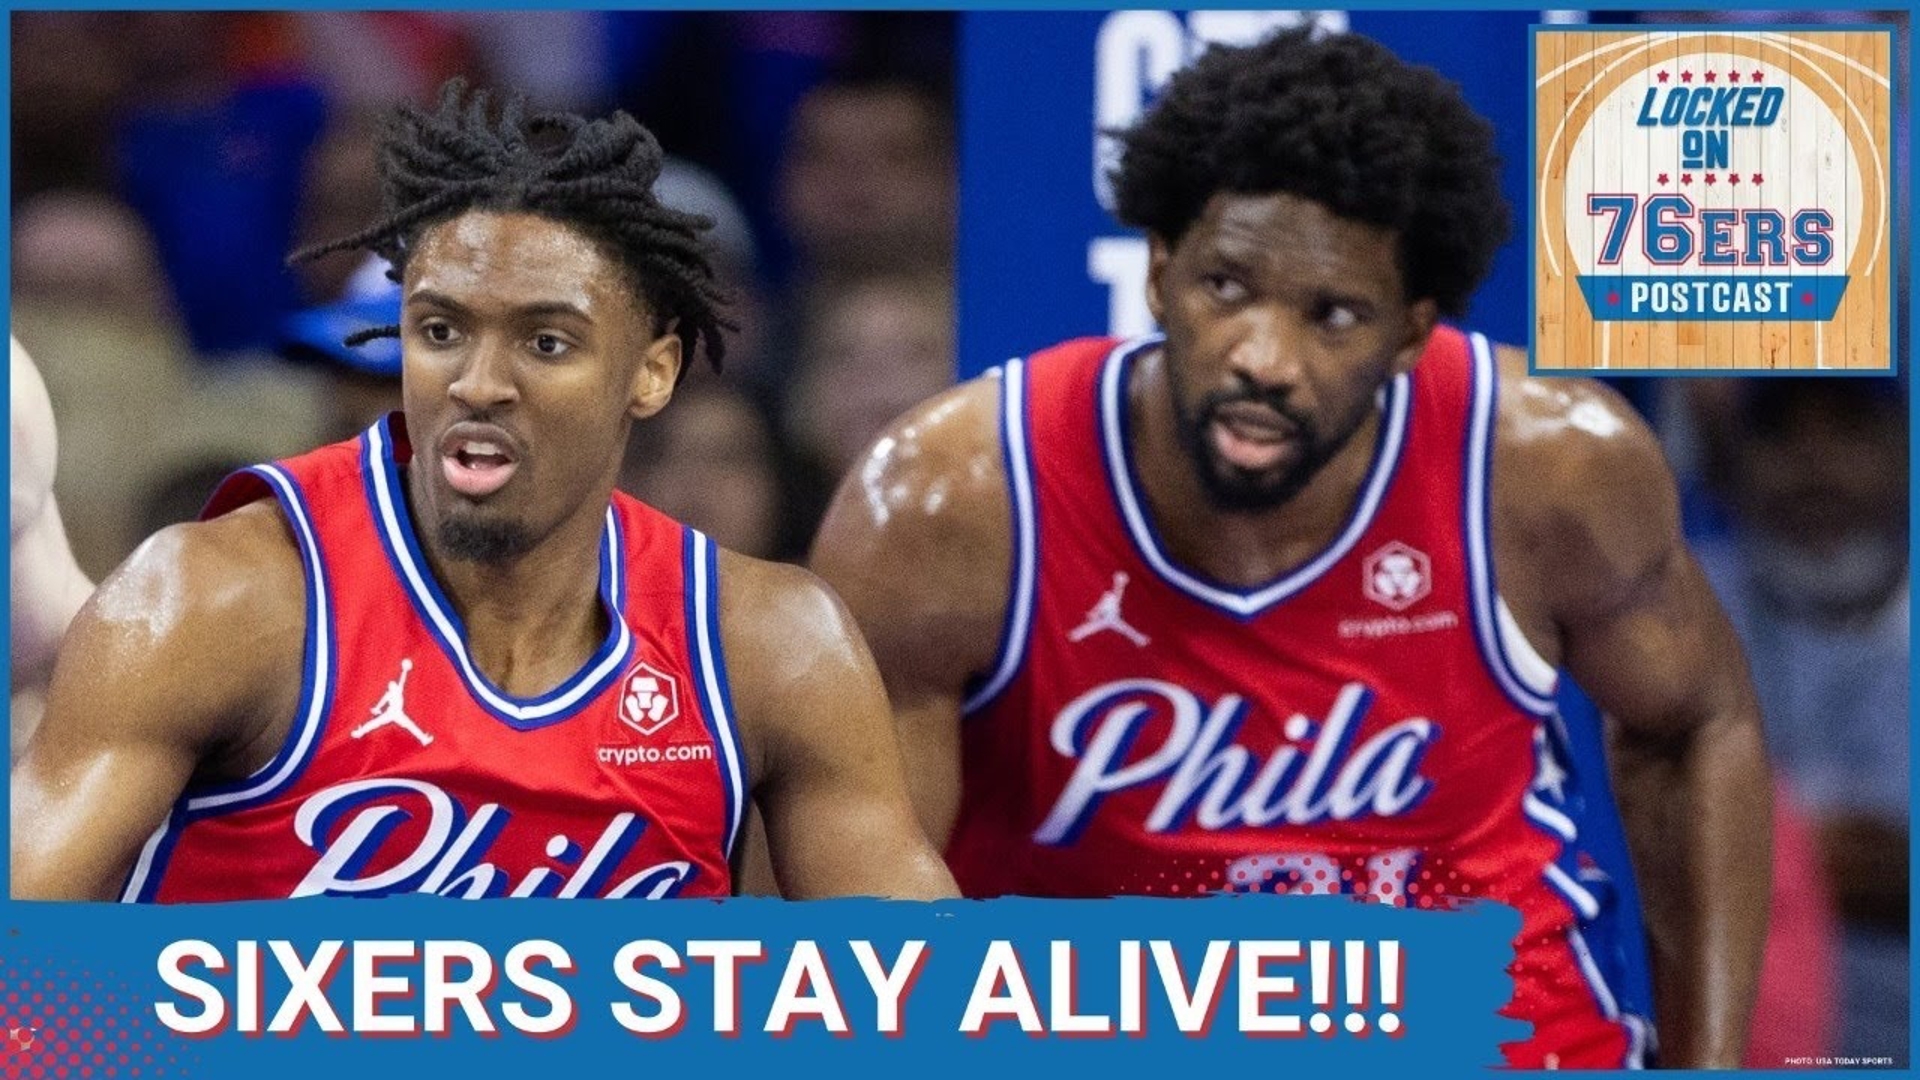 TYRESE MAXEY has the game of his life as the Philadelphia 76ers beat the New York Knicks 112-106 in overtime to force a Game 6!